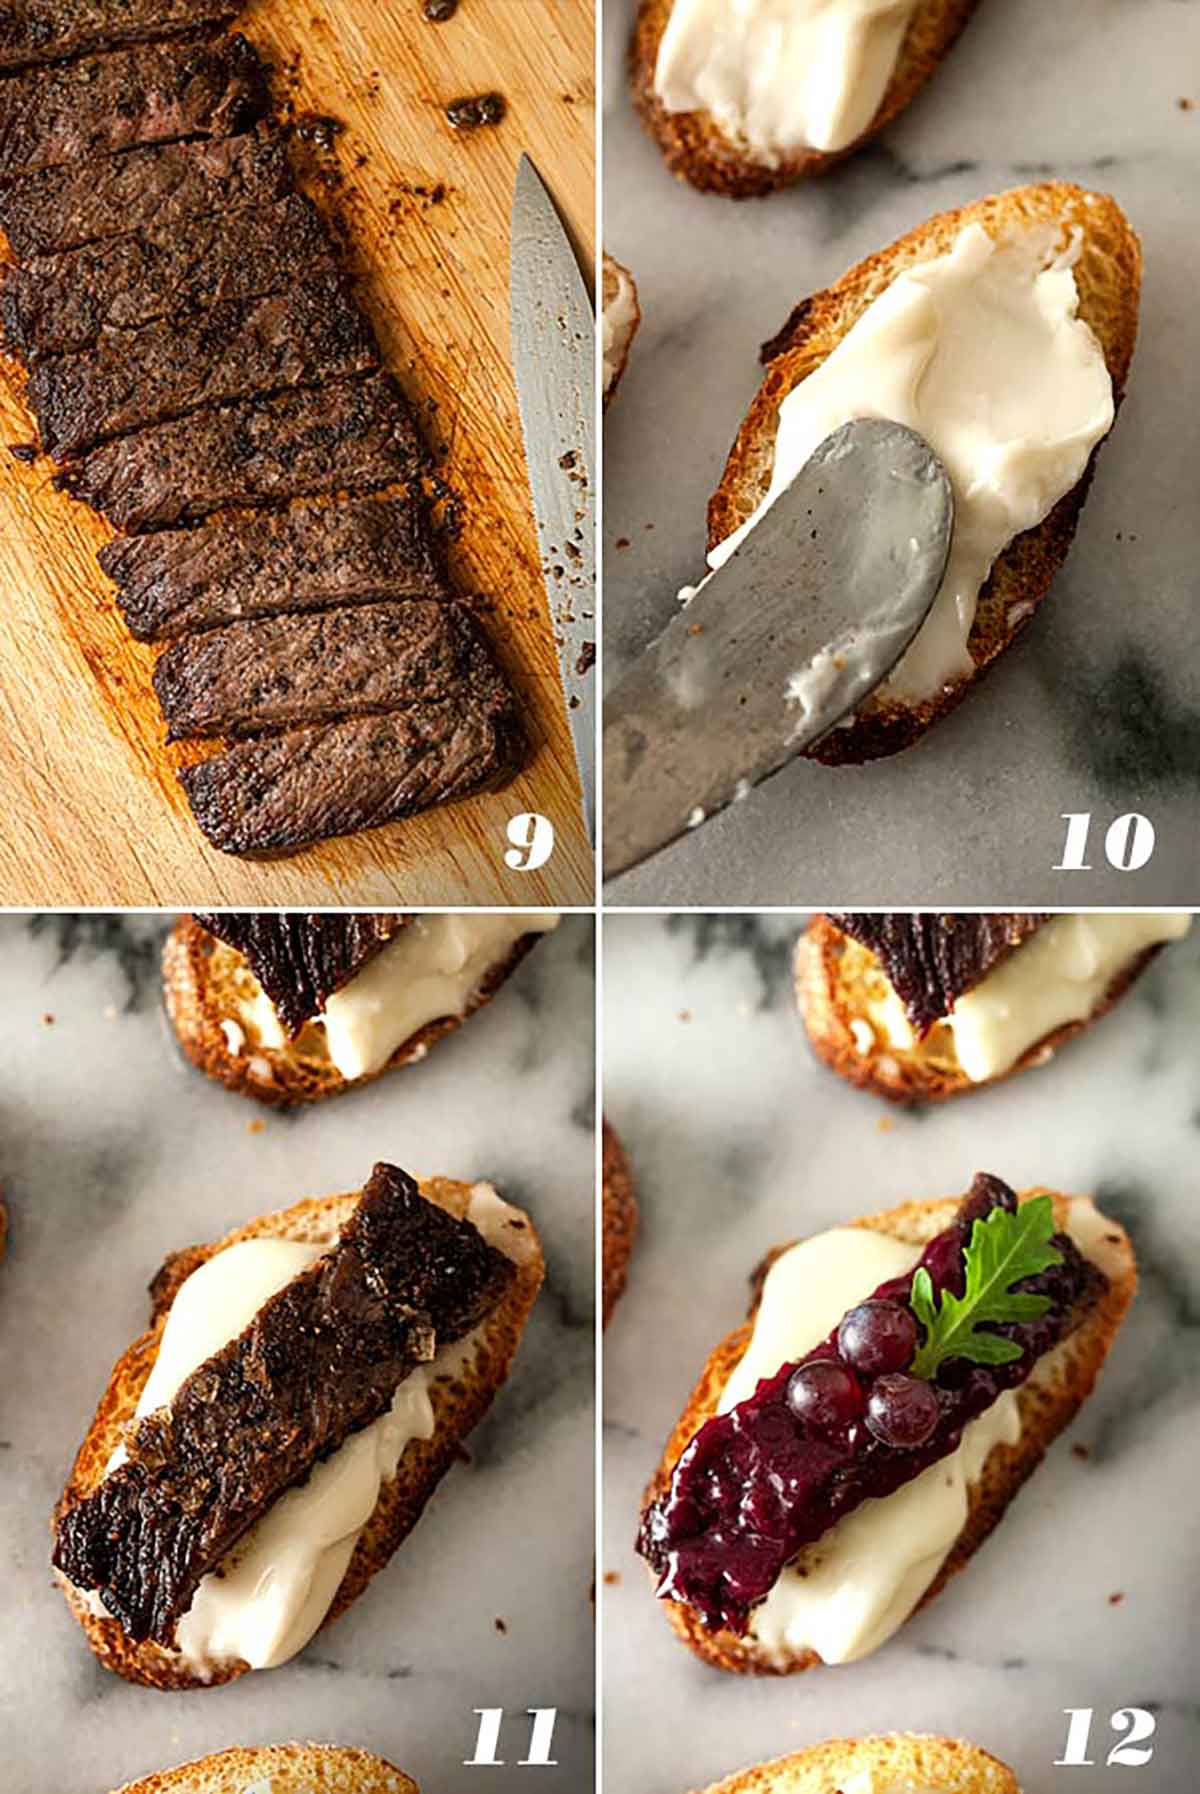 A collage of 4 images showing how to make steak appetizers.